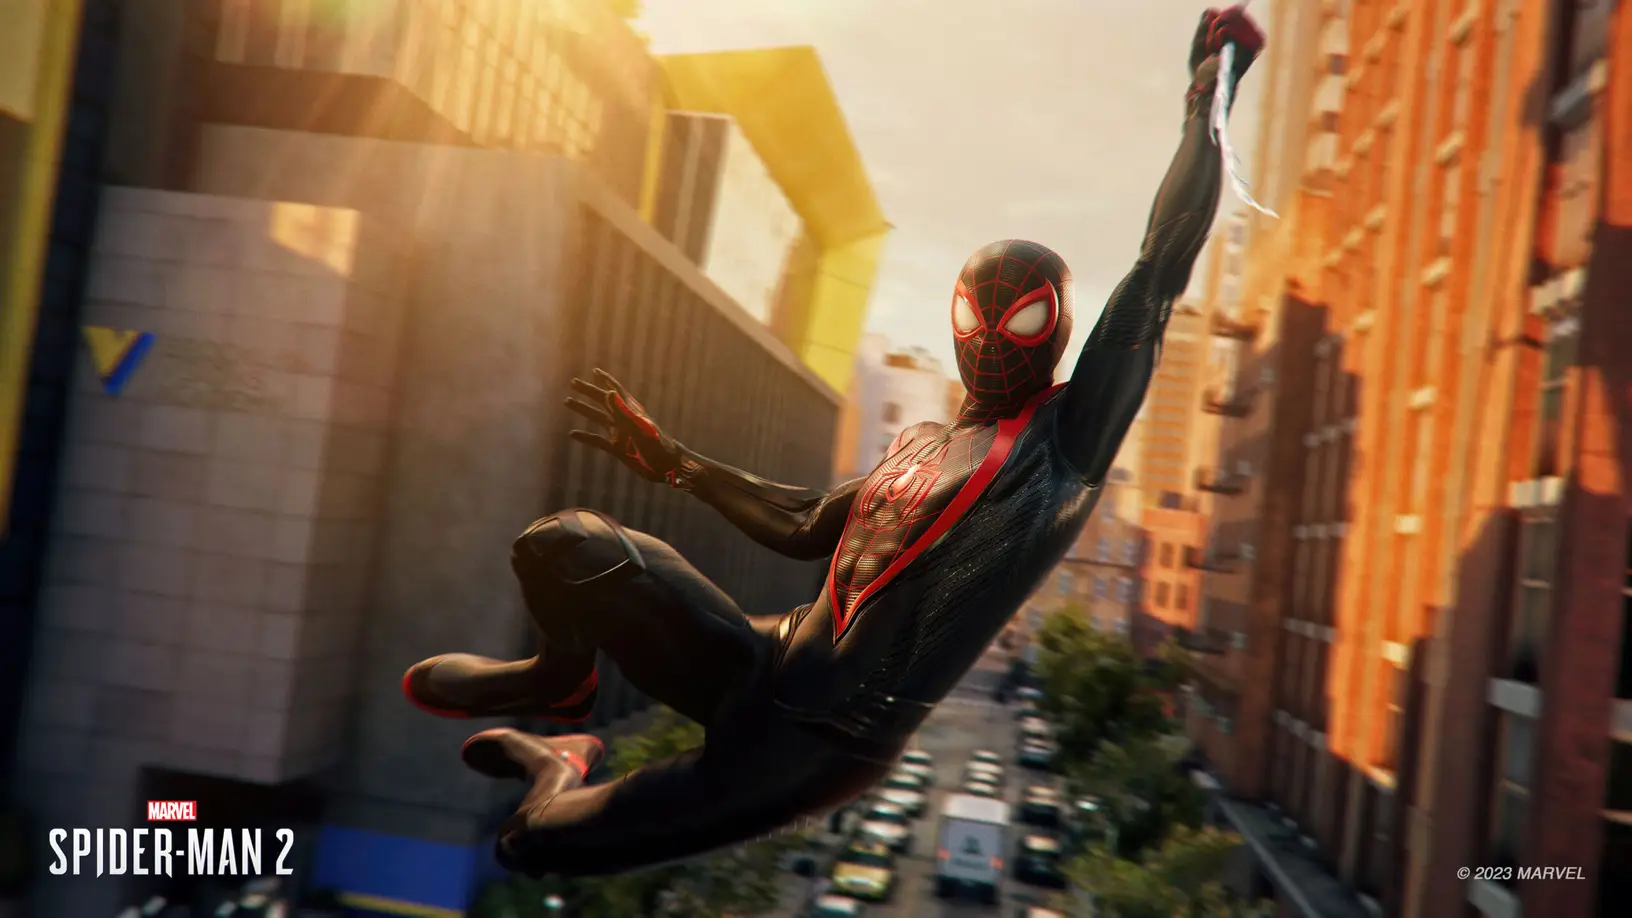 Marvels' Spider-Man 2 1.001.003 Patch Notes: Latest Changes and Fixes - News